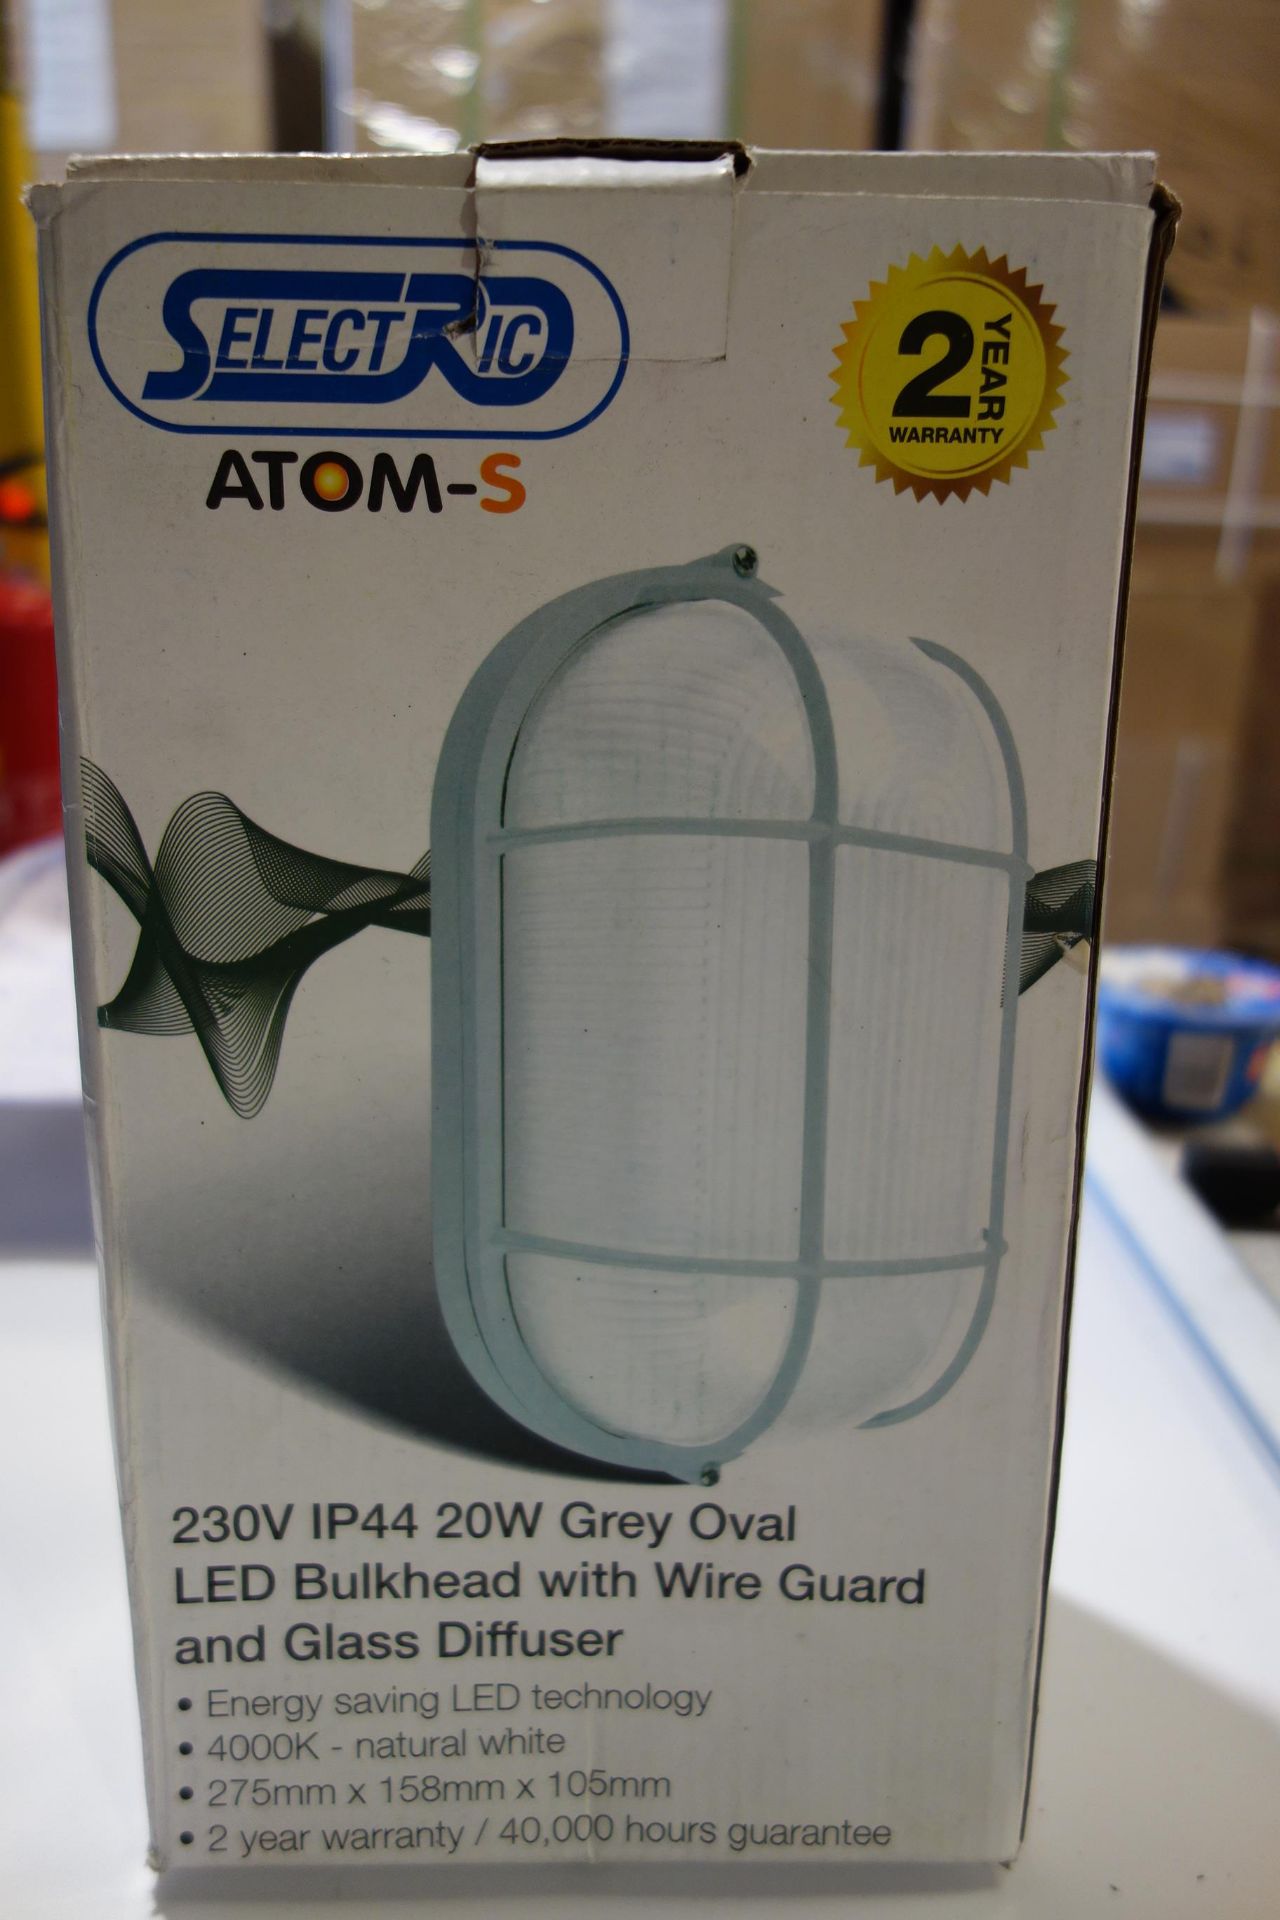 20x Selecric ATOM-5-3 20W LED Grey Oval Bulkhead With Wire Guard and Glass Diffuser 275mmx158x105mm